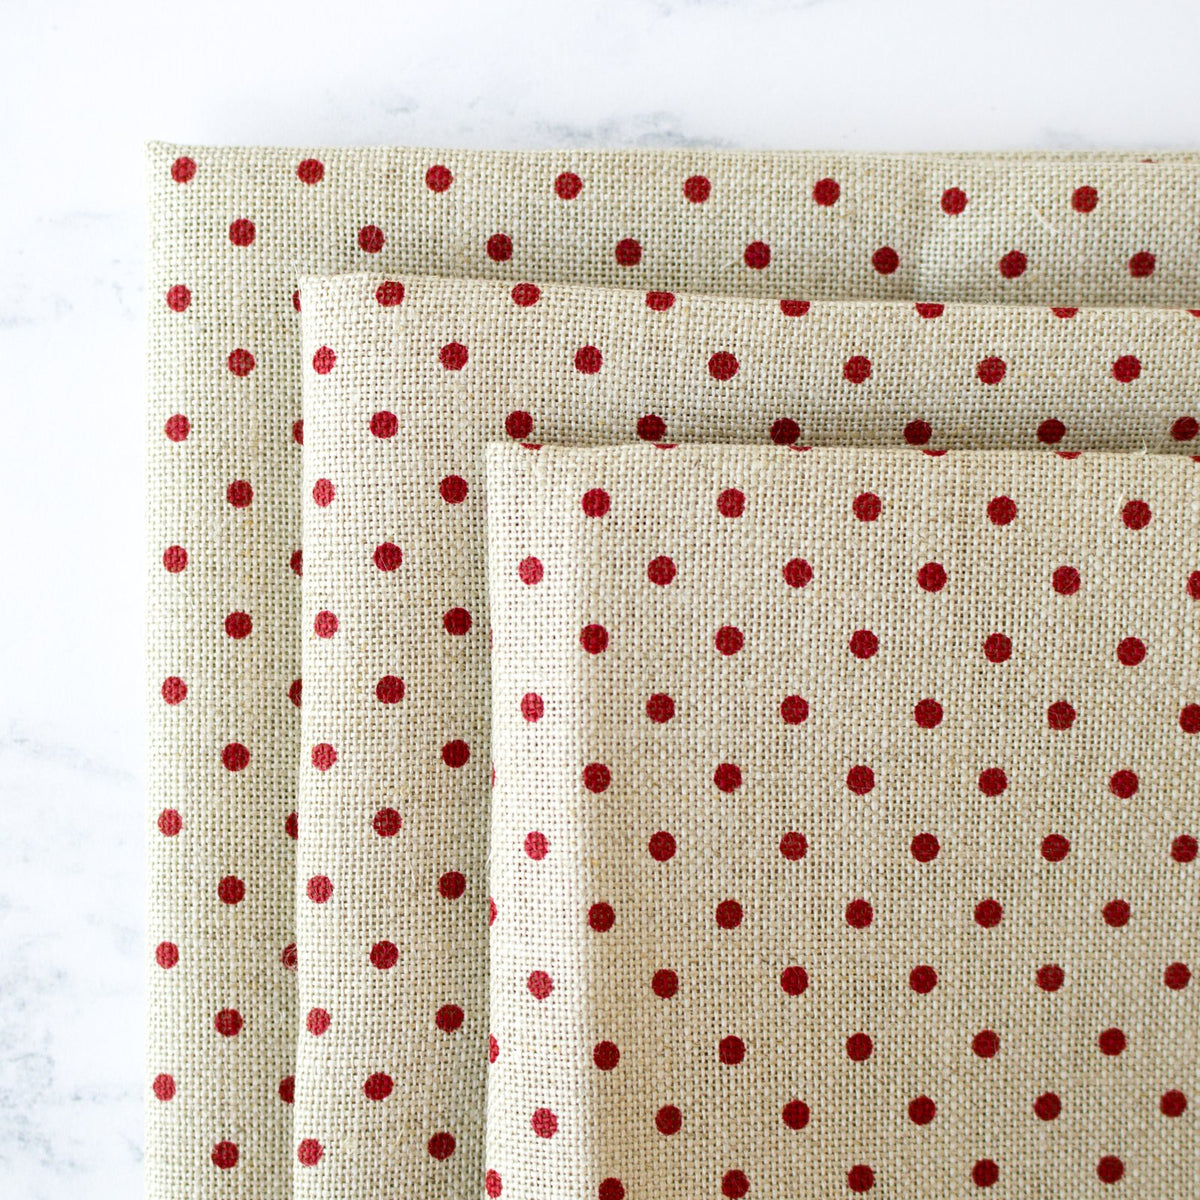 Natural/Red Polka Dot Linen Fabric - 32 Count